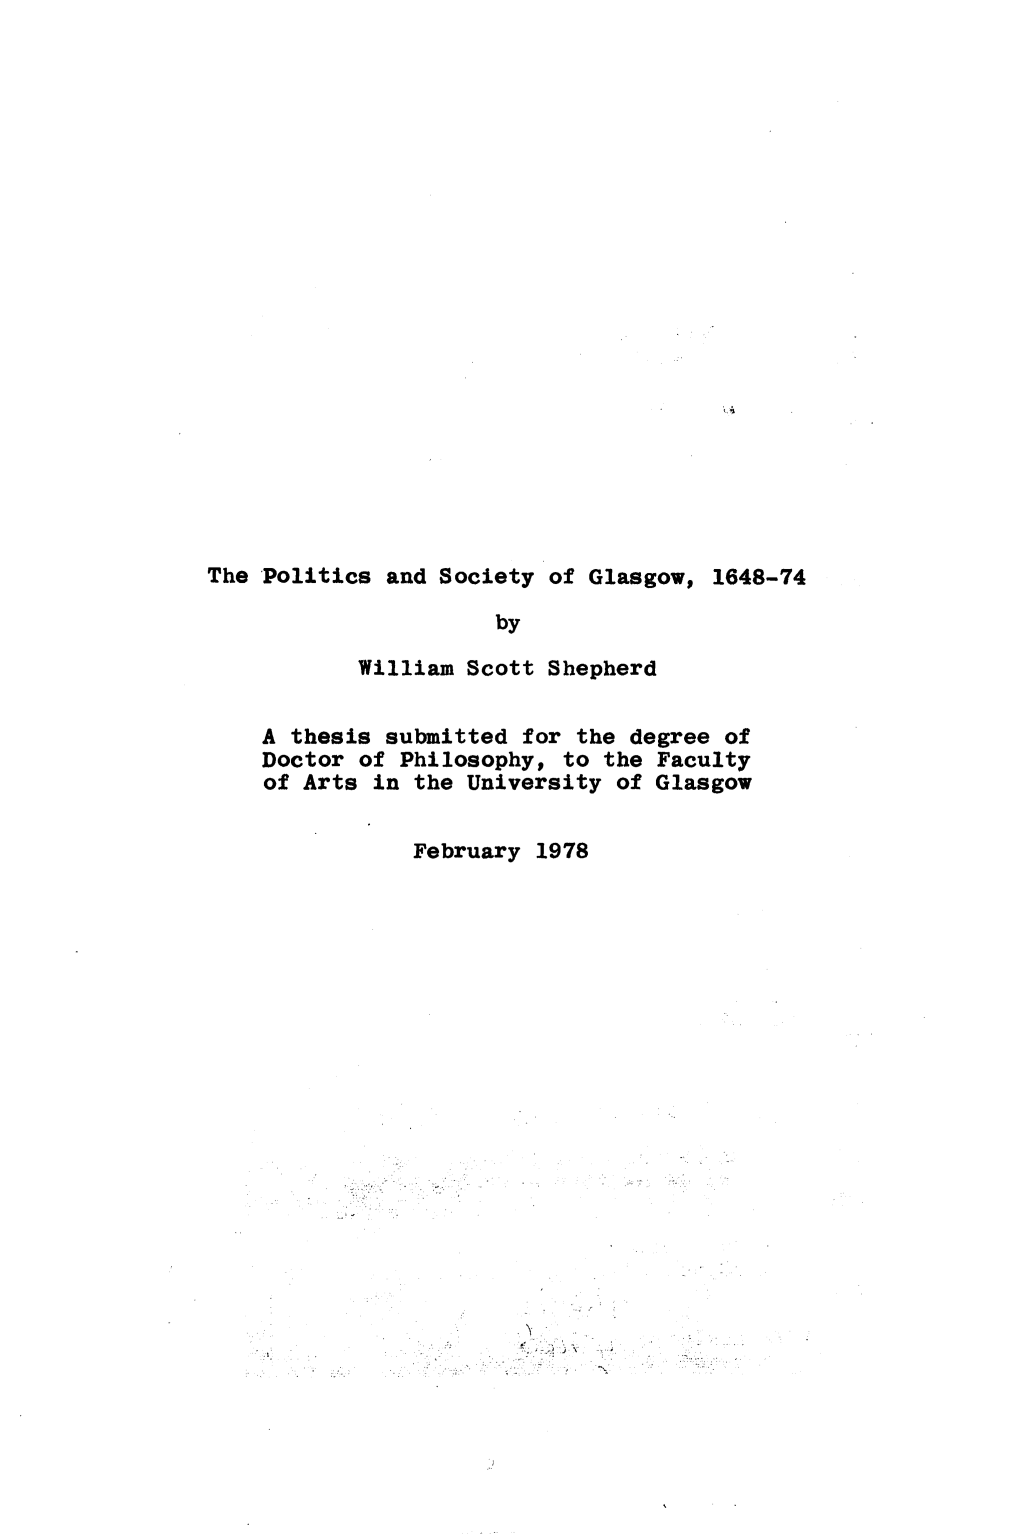 The Politics and Society of Glasgow, 1648-74 by William Scott Shepherd a Thesis Submitted for the Degree of Doctor of Philosophy